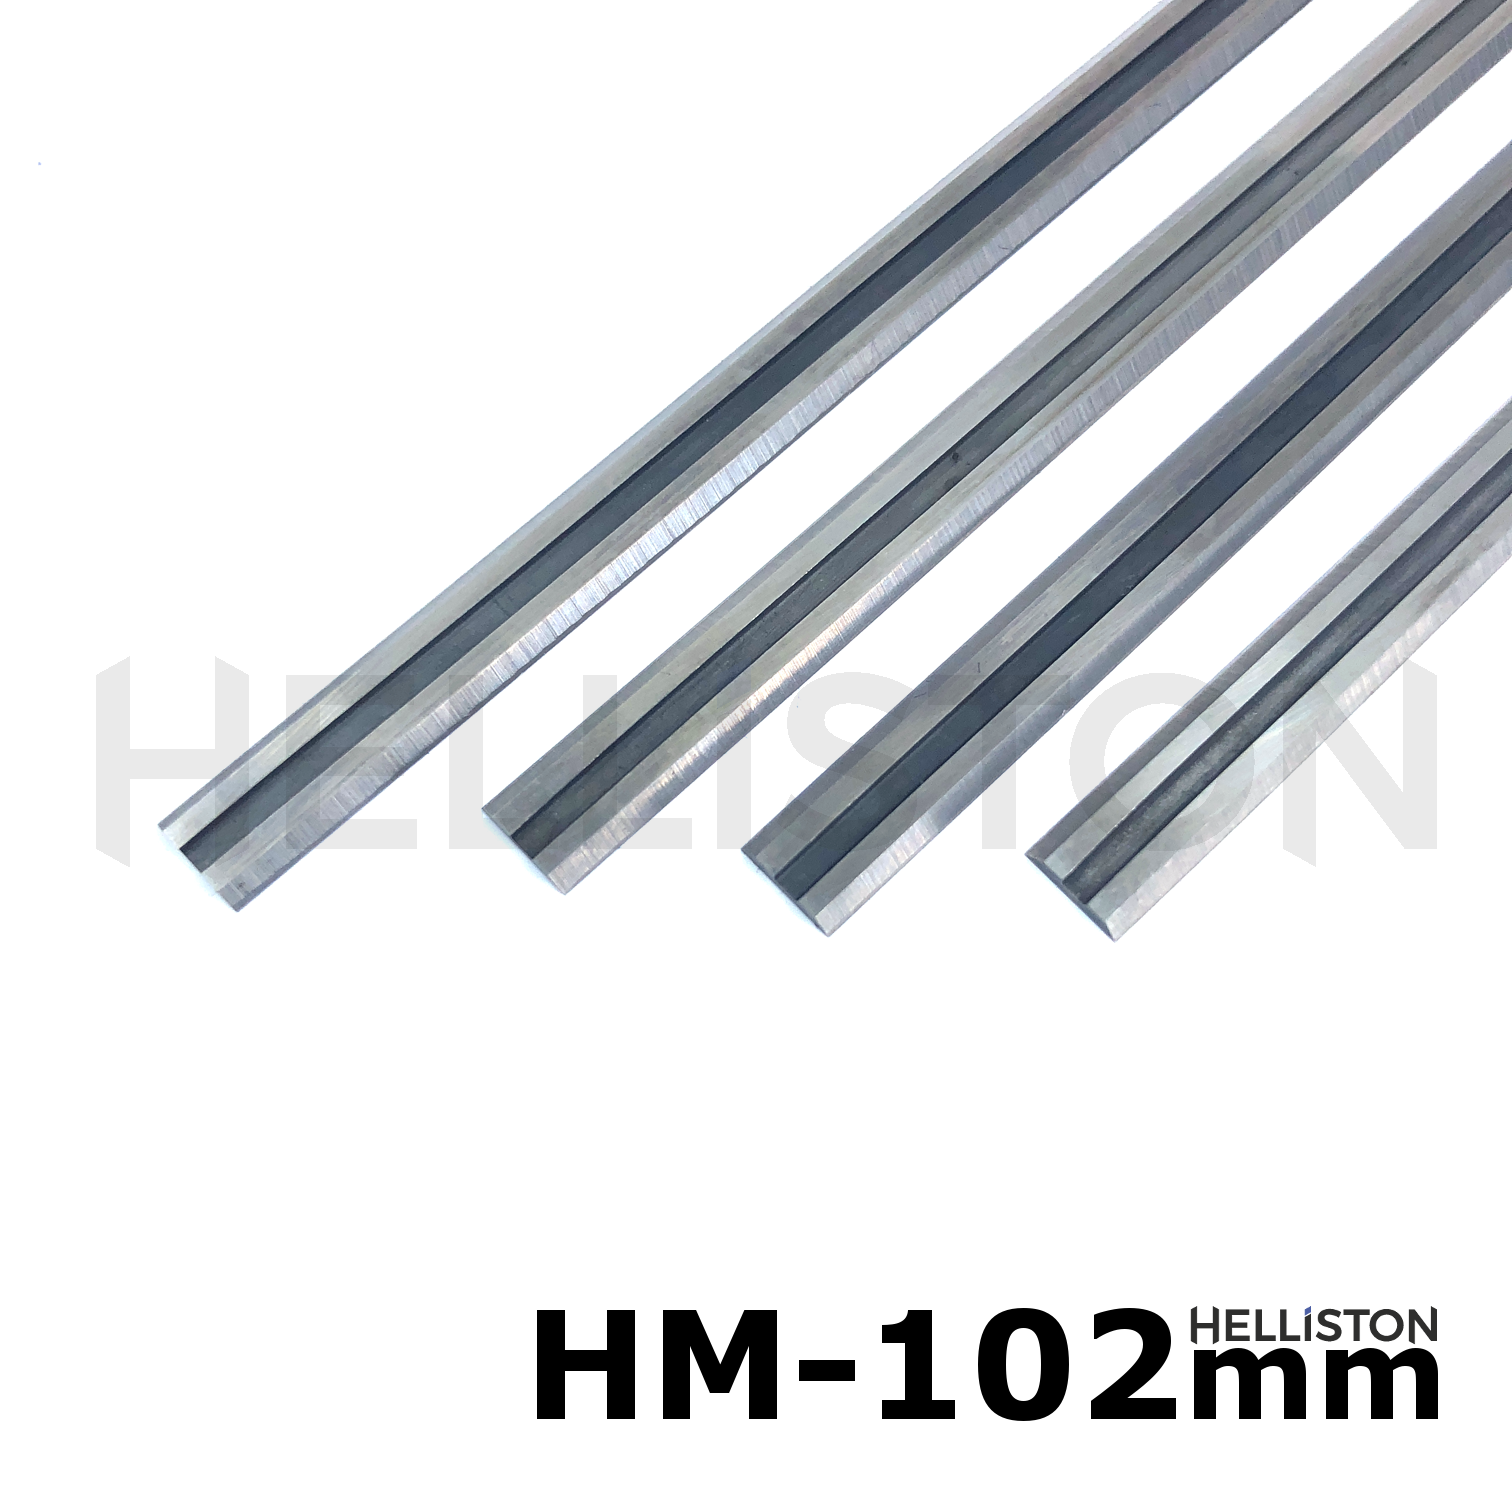 HM/ TCT Planer Blades, Reversible knives 102 mm, hard metal (Tungsten carbide), double-sided, for electrical planers, AEG, Atlas-Copco EH102, HB750, HBE800, B39 etc